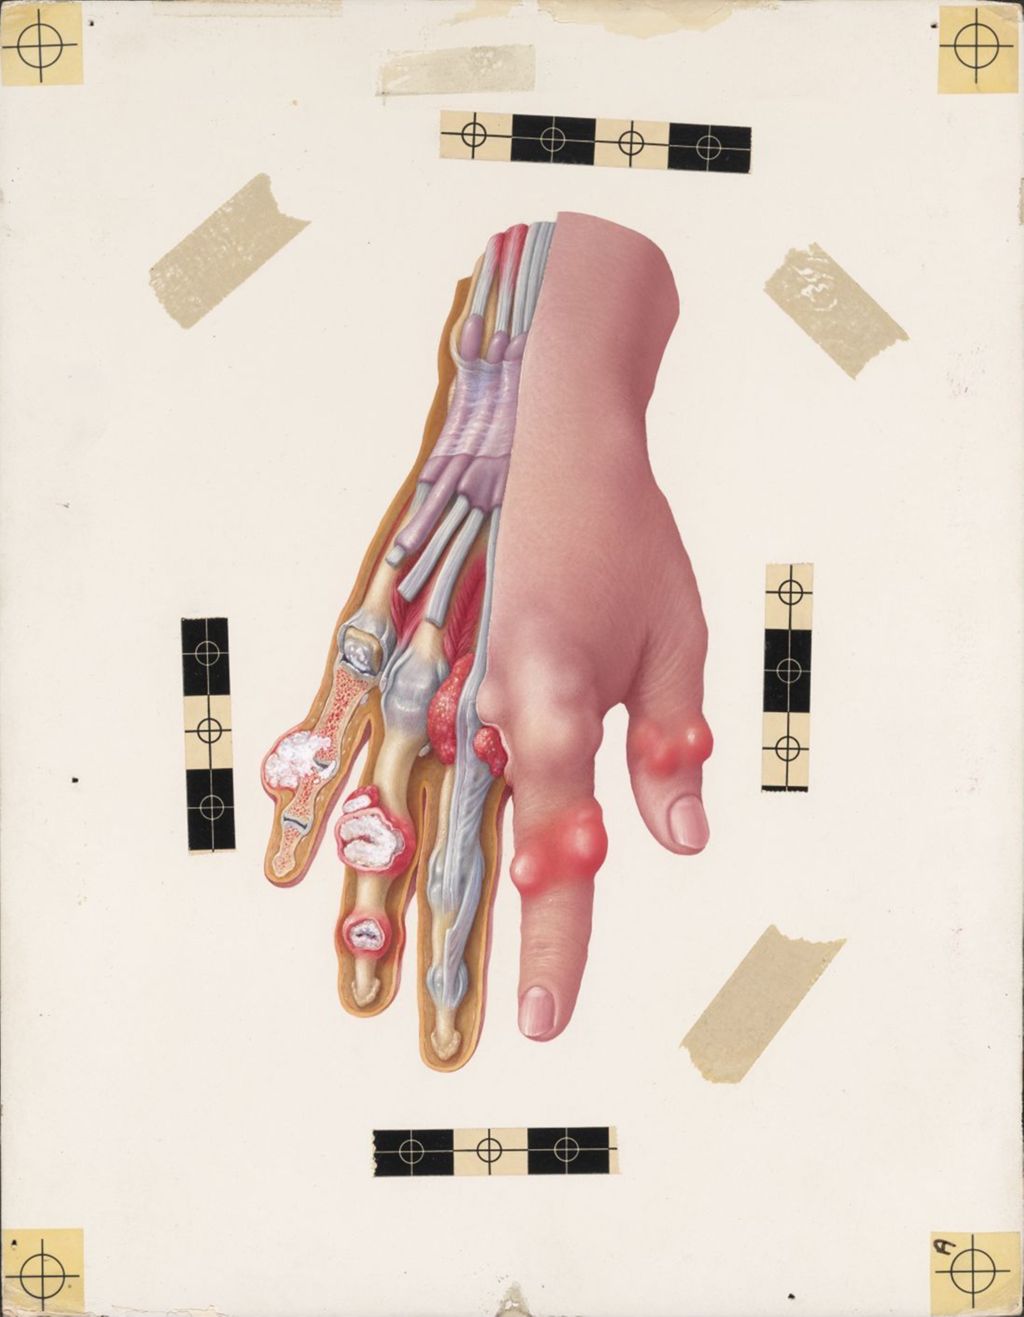 Miniature of Aspects of Gout in a hand